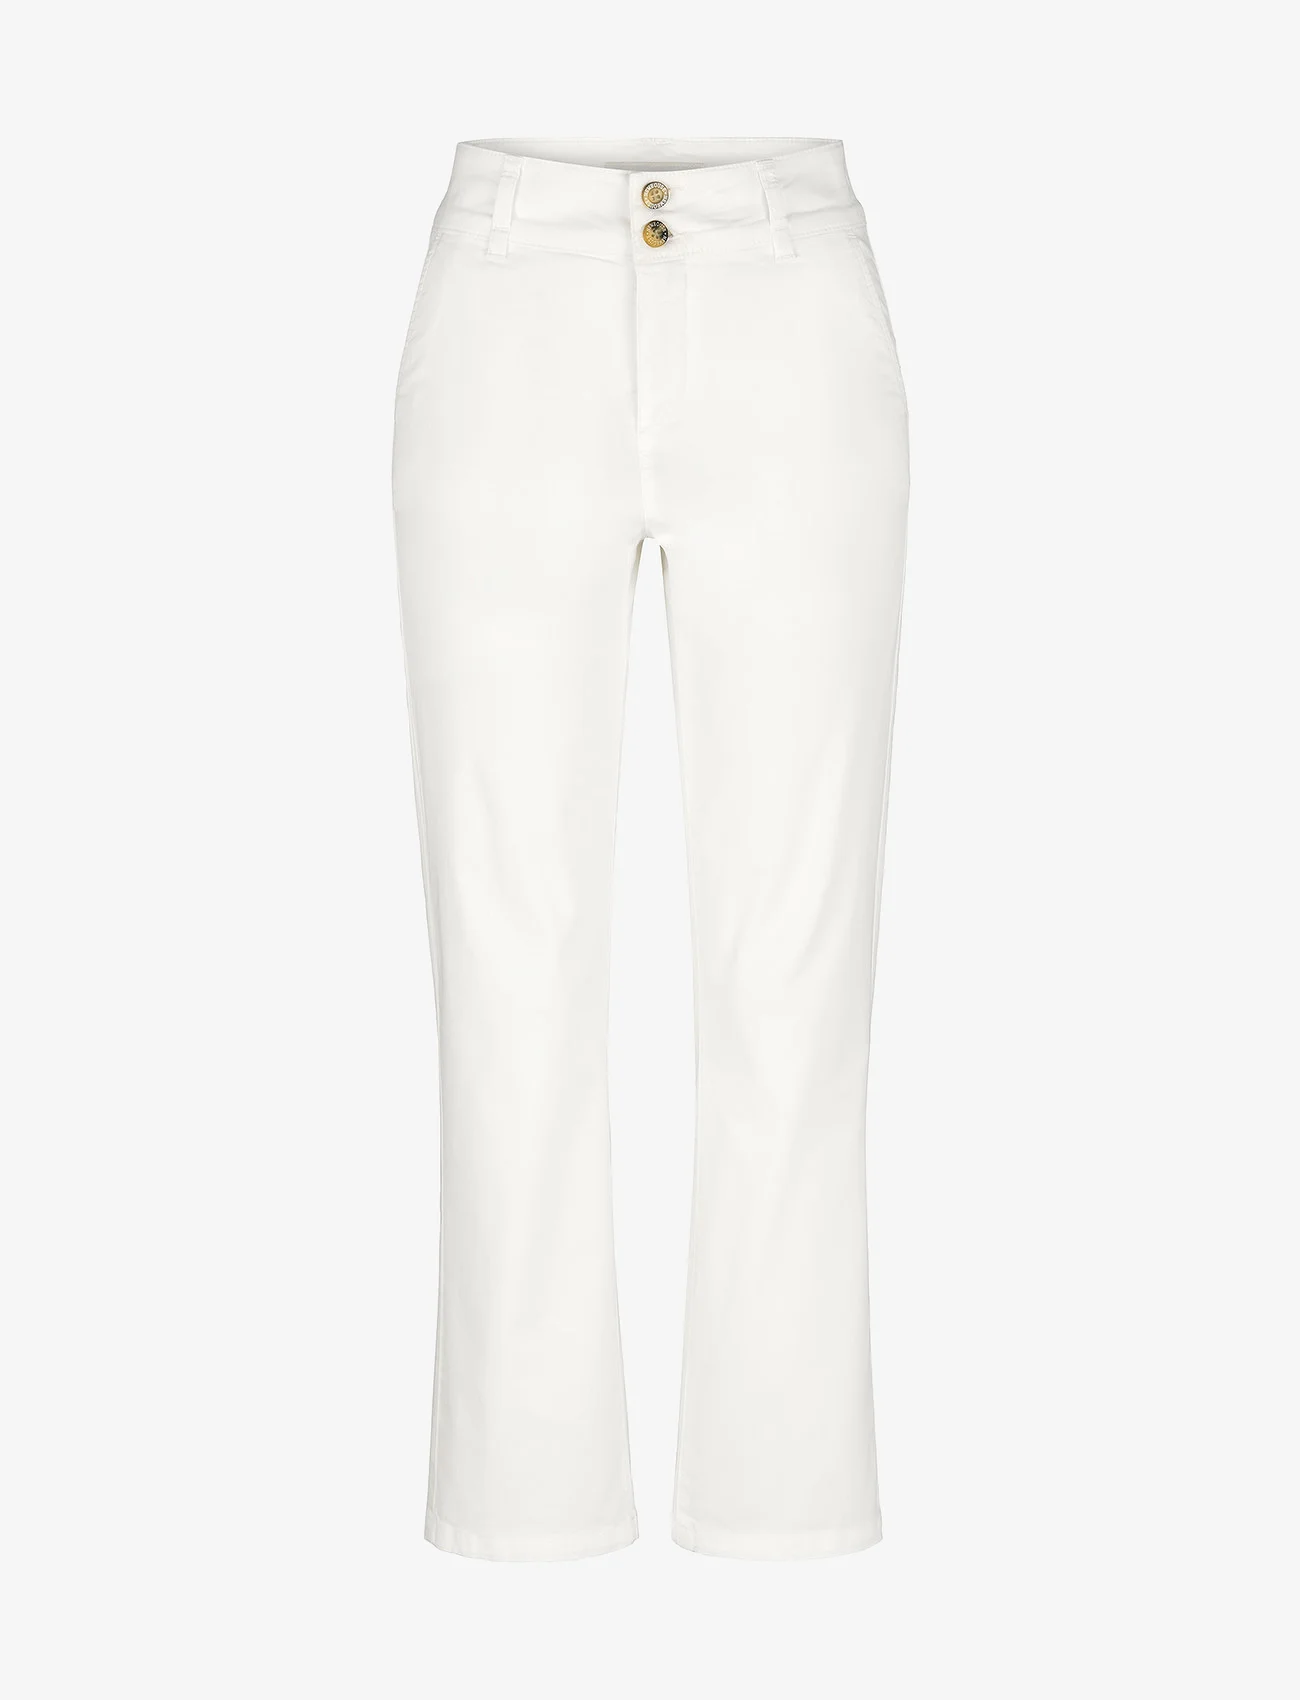 Newhouse - Cecilia Chinos - chinos - white - 0